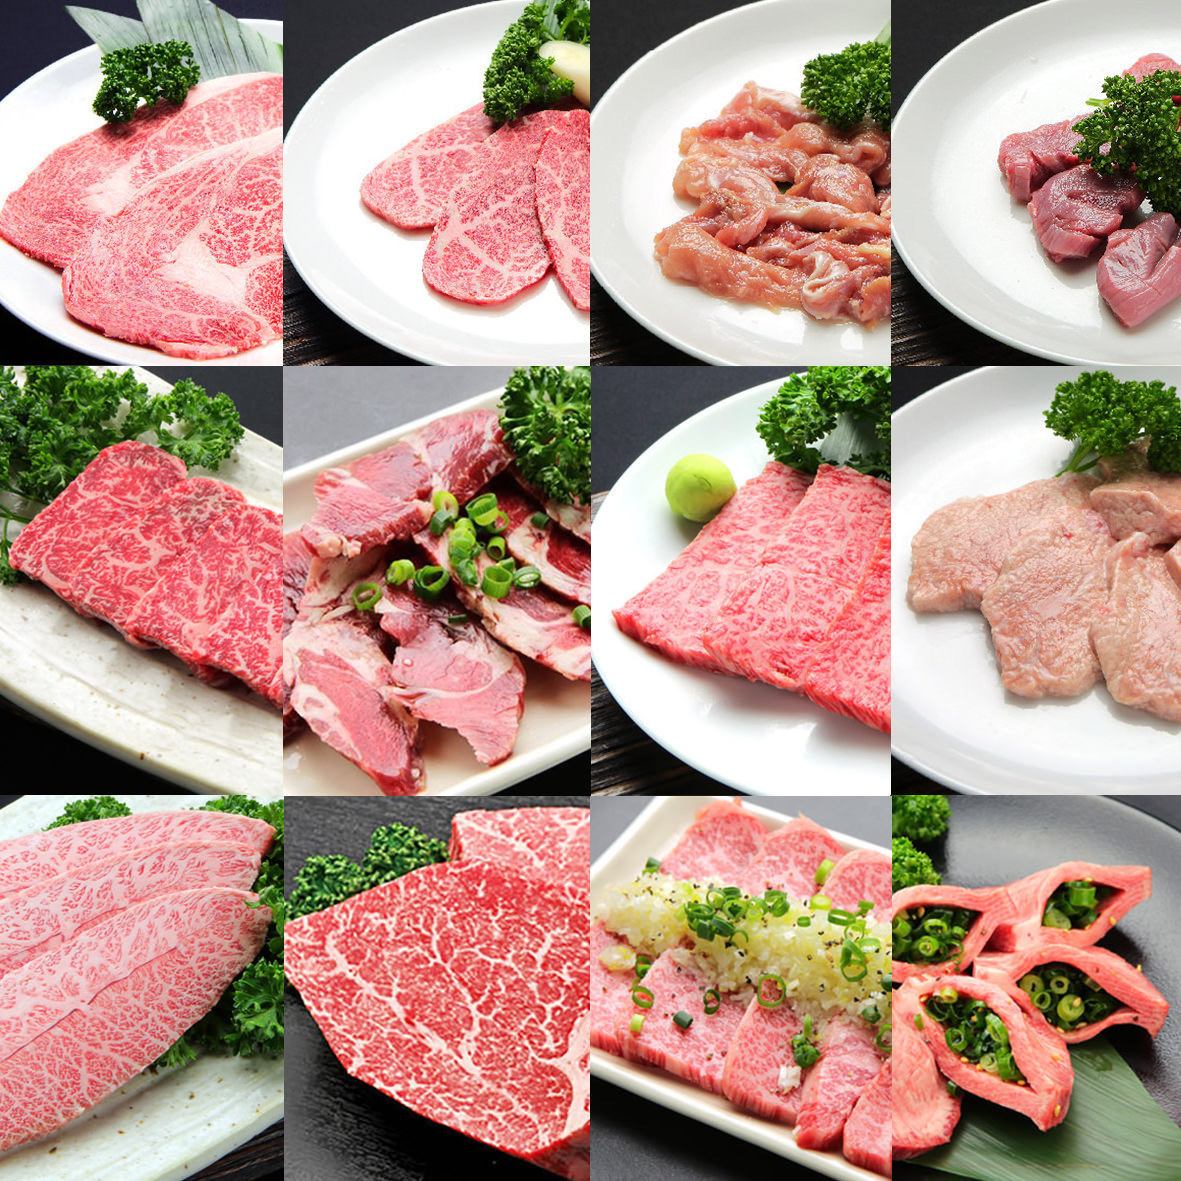 We also offer an all-you-can-eat course with a wide variety of Japanese beef!